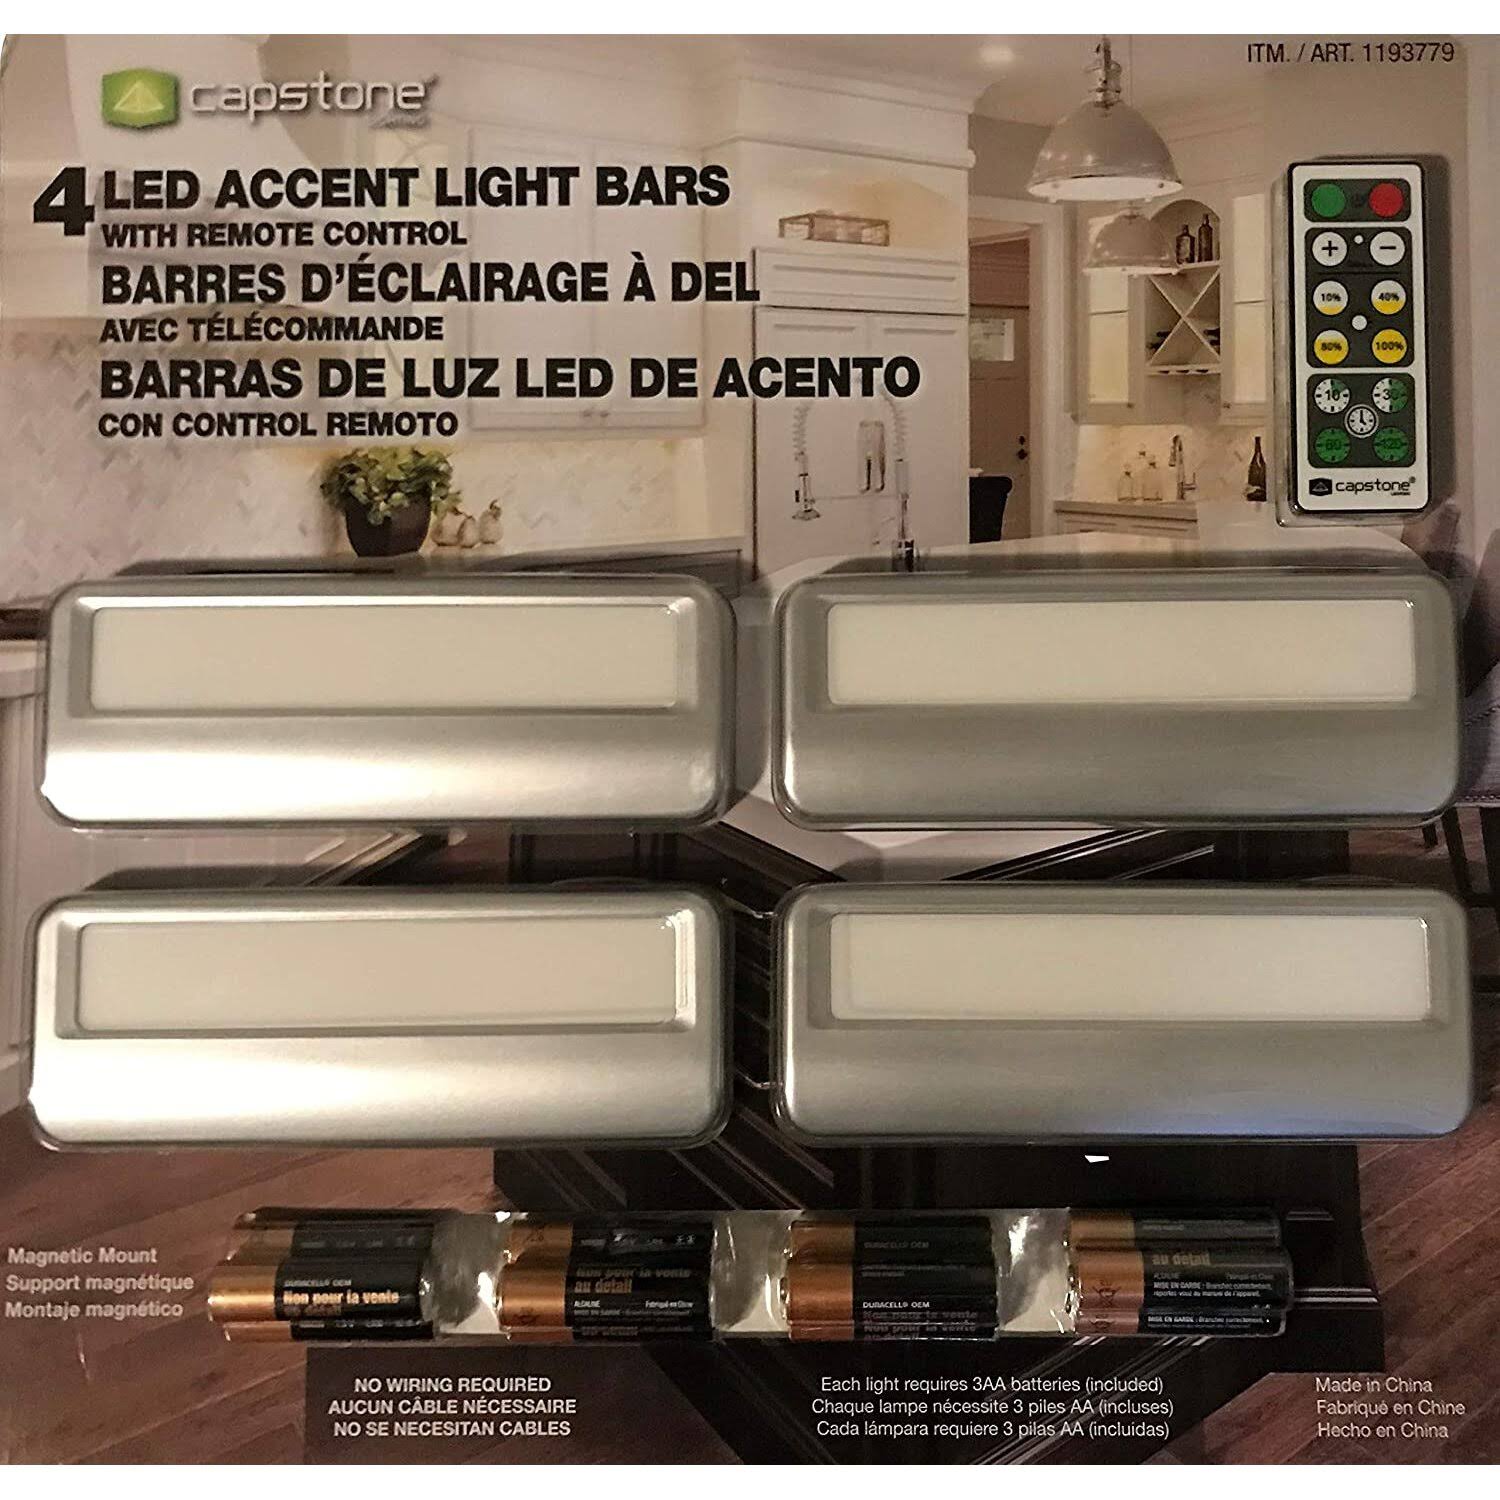 Capstone 4 LED Accent Light Bars with Remote Control & Batteries